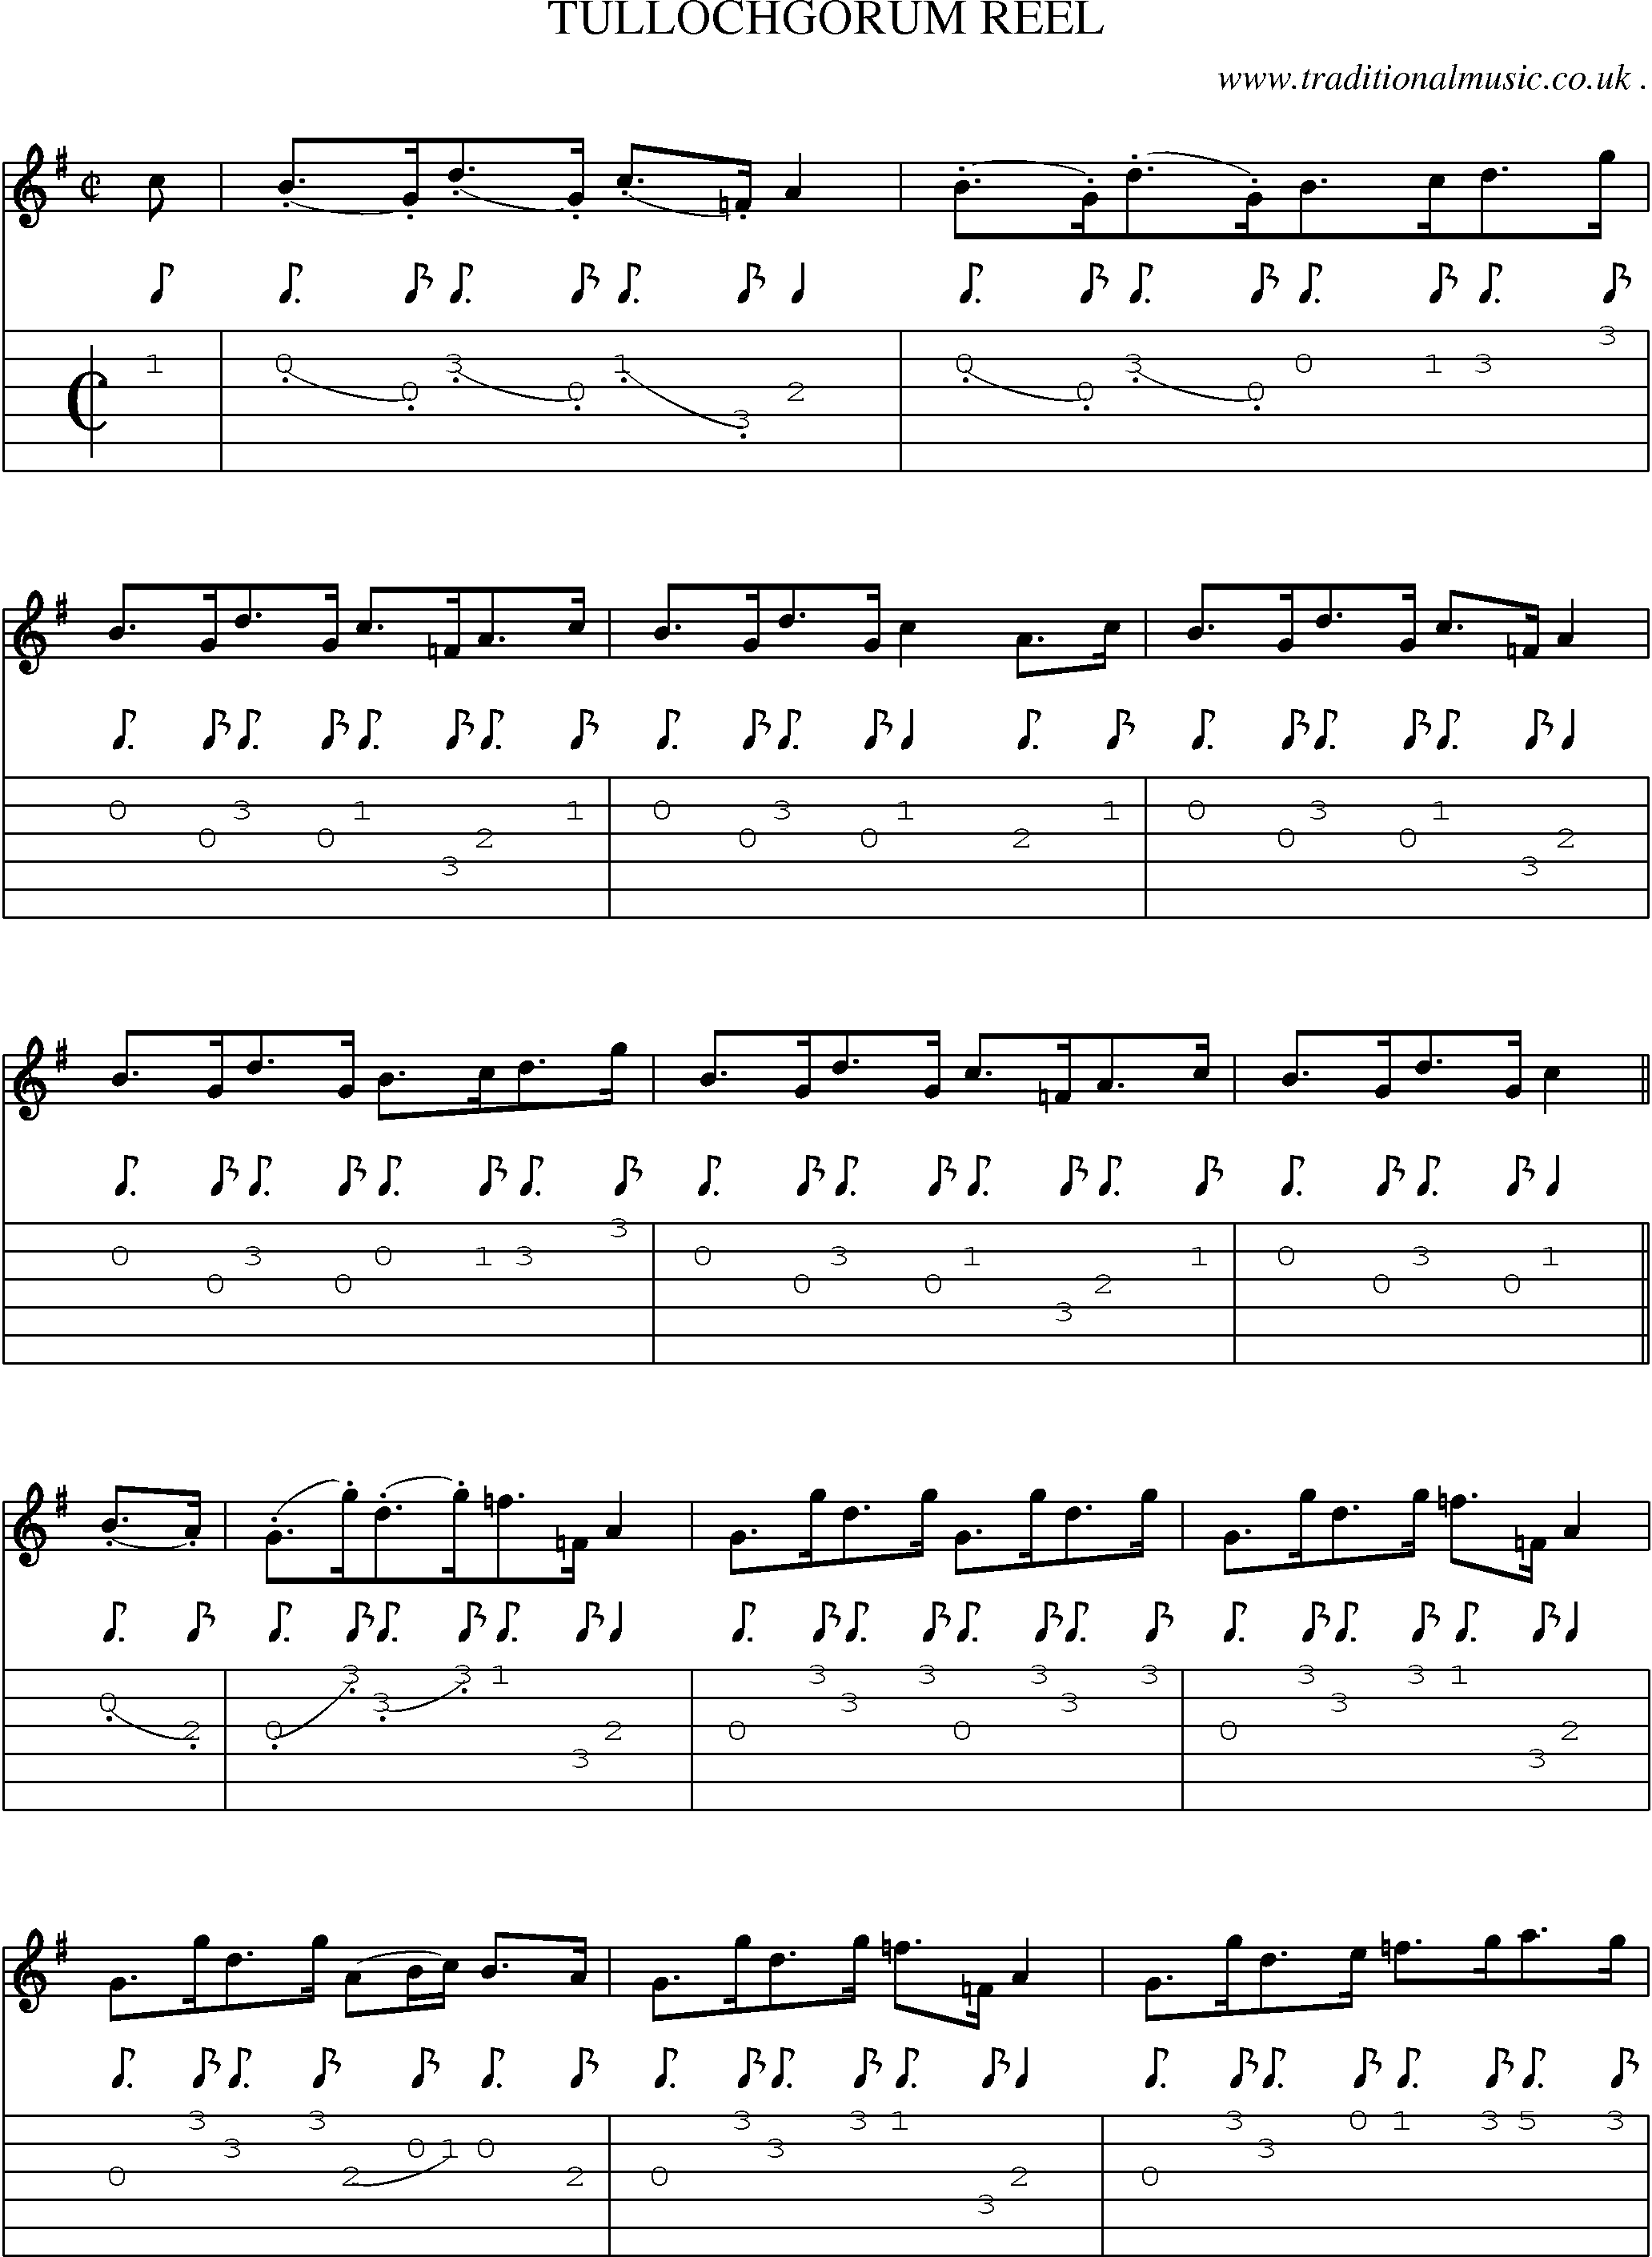 Sheet-Music and Guitar Tabs for Tullochgorum Reel